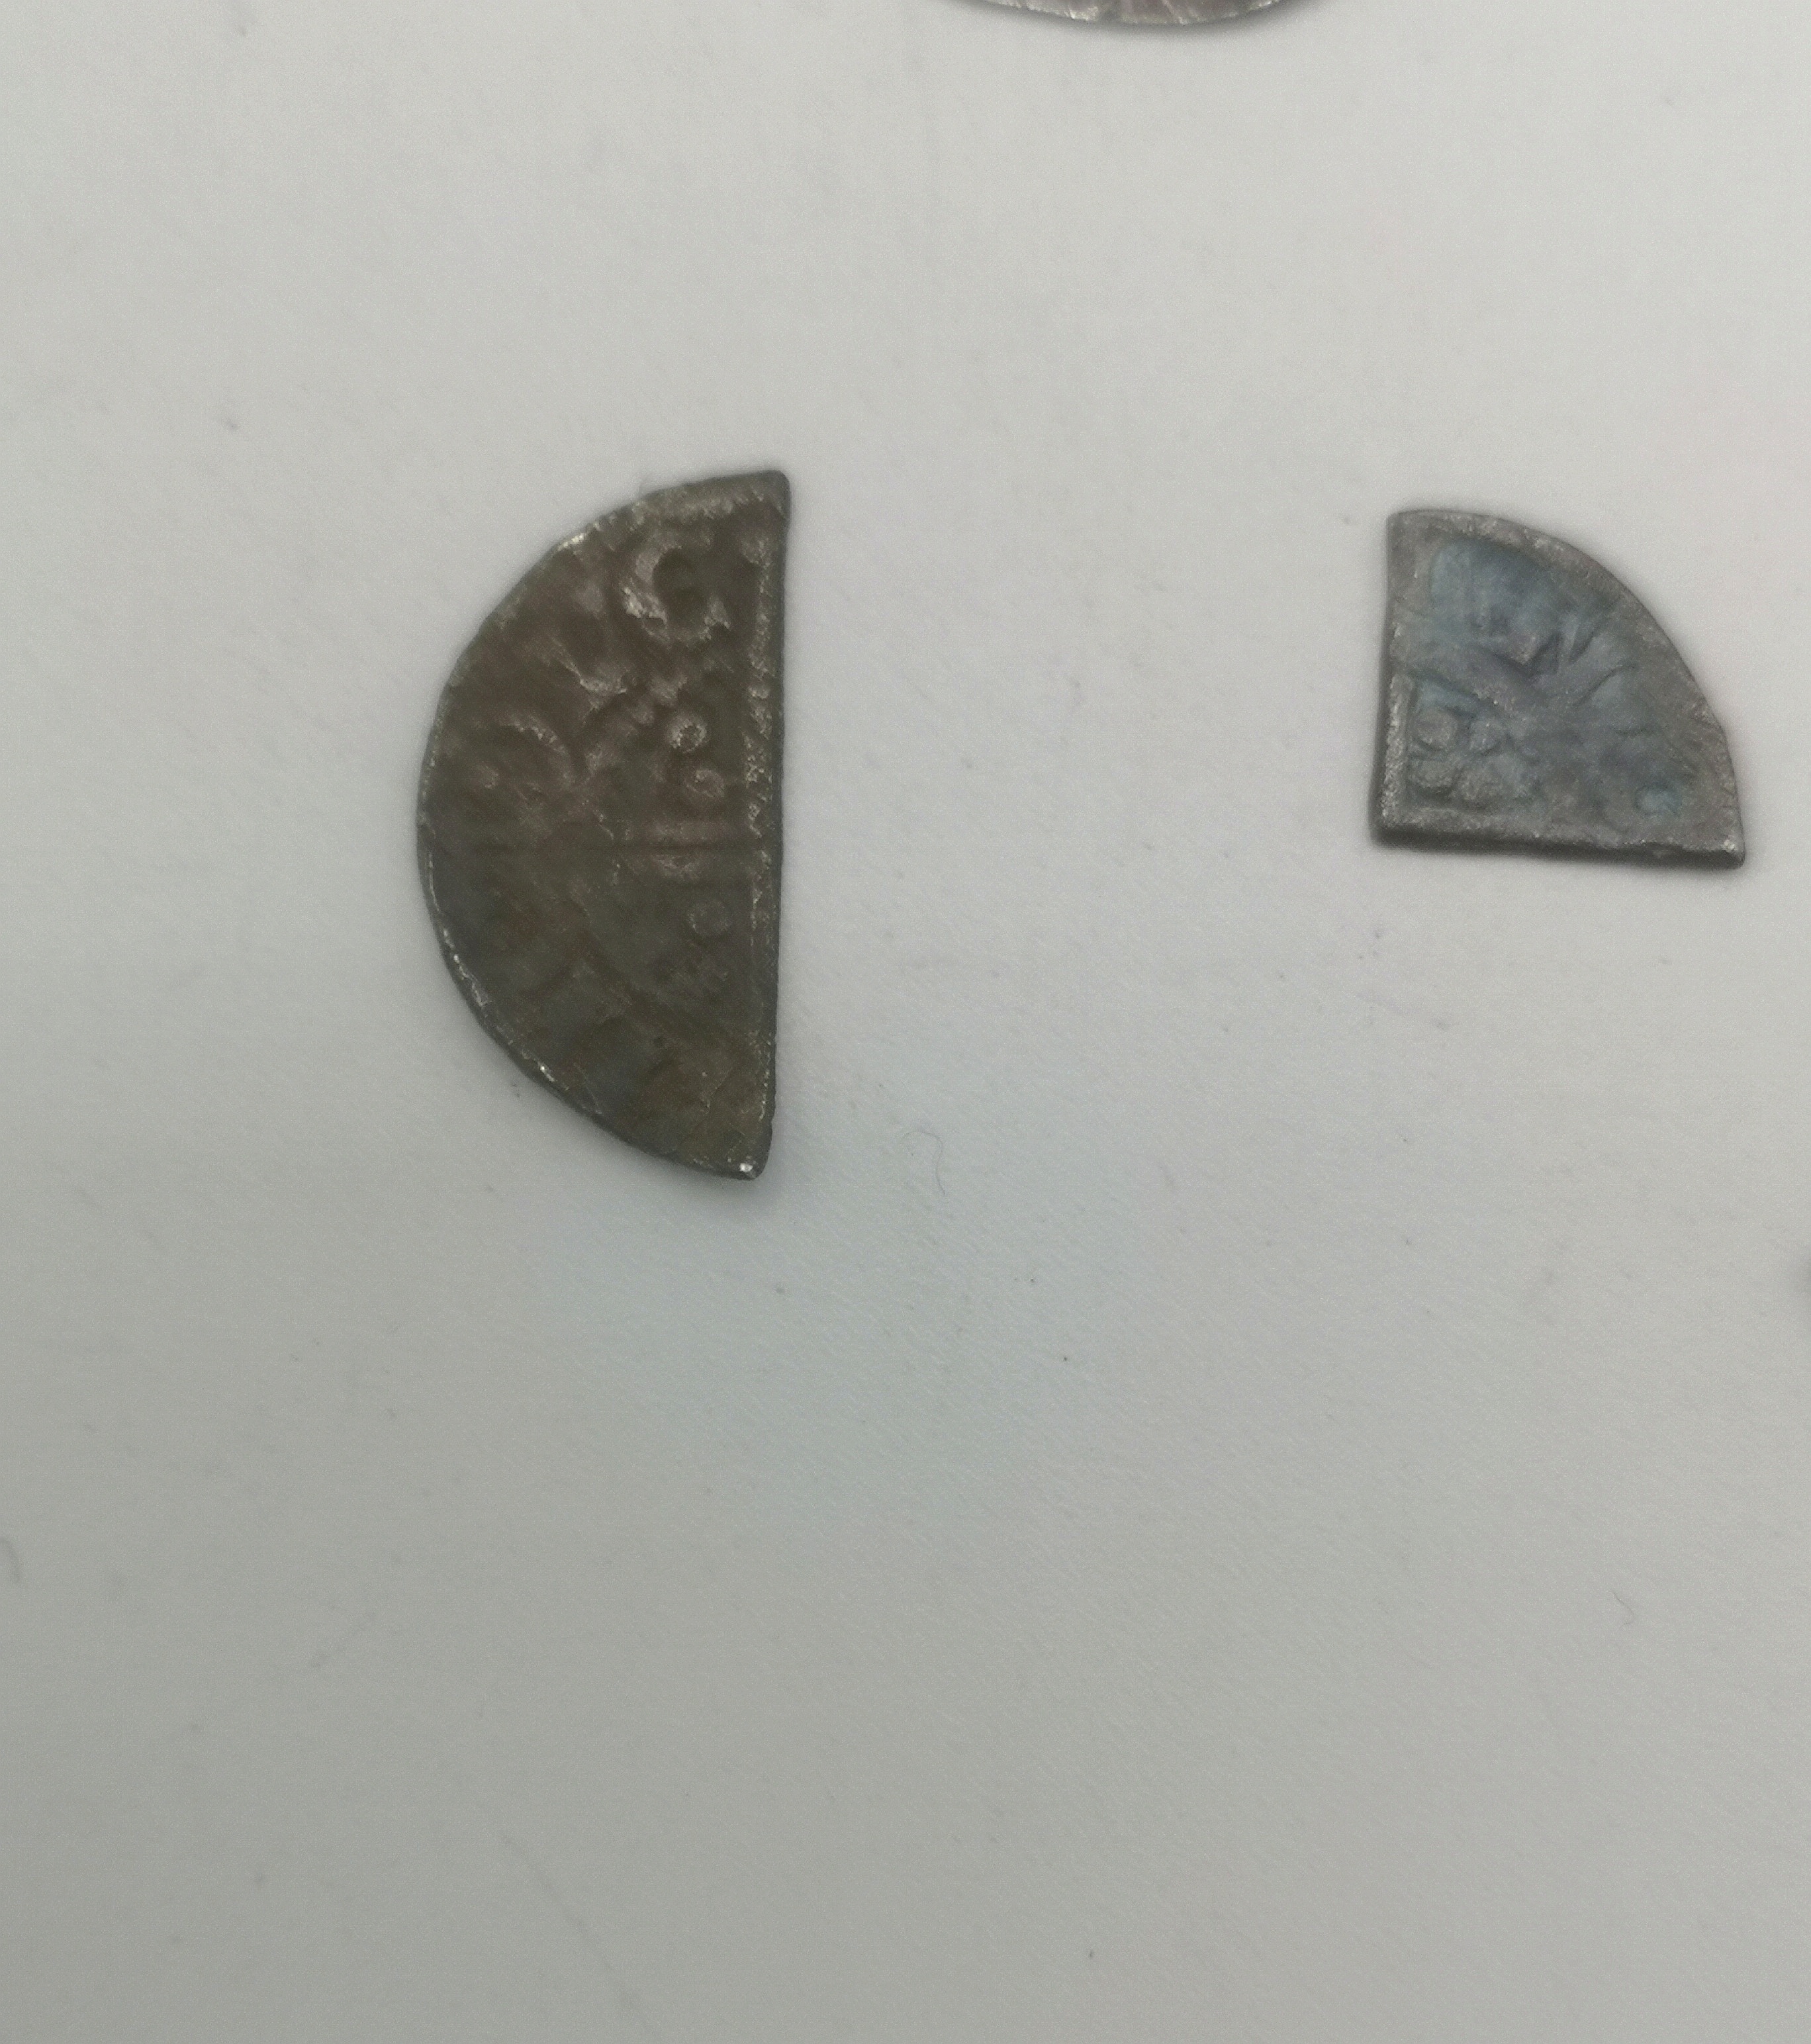 Collection of silver cross pennies, some clipped - Image 5 of 6